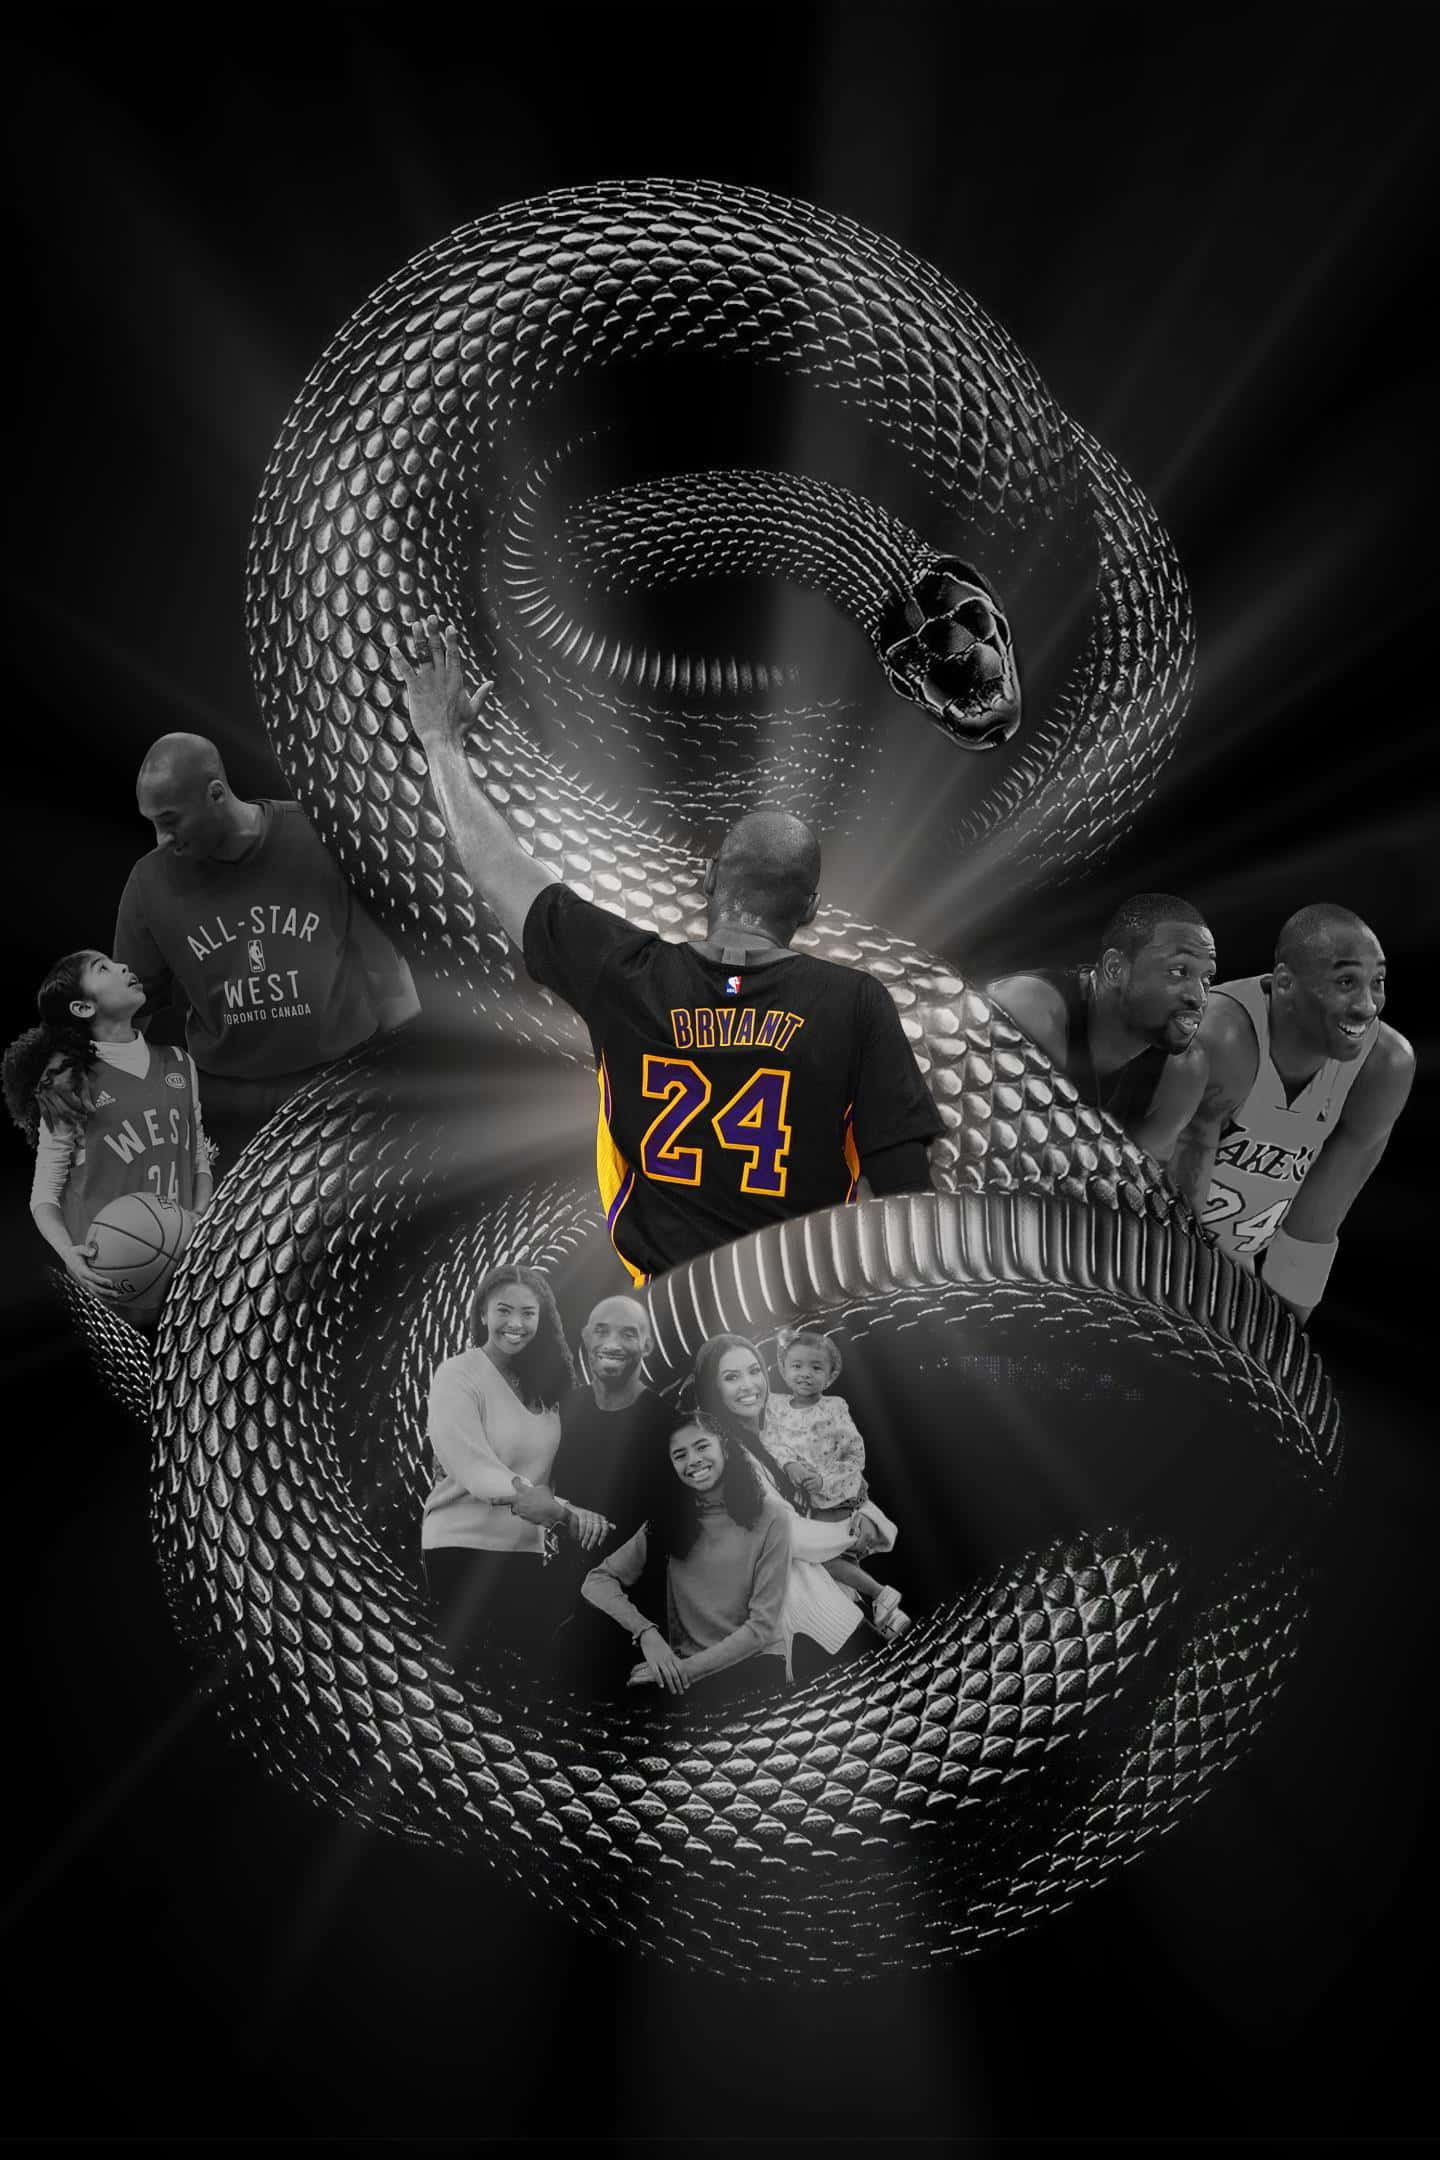 Honor the legacy of Kobe Bryant with the Mamba Mentality Wallpaper